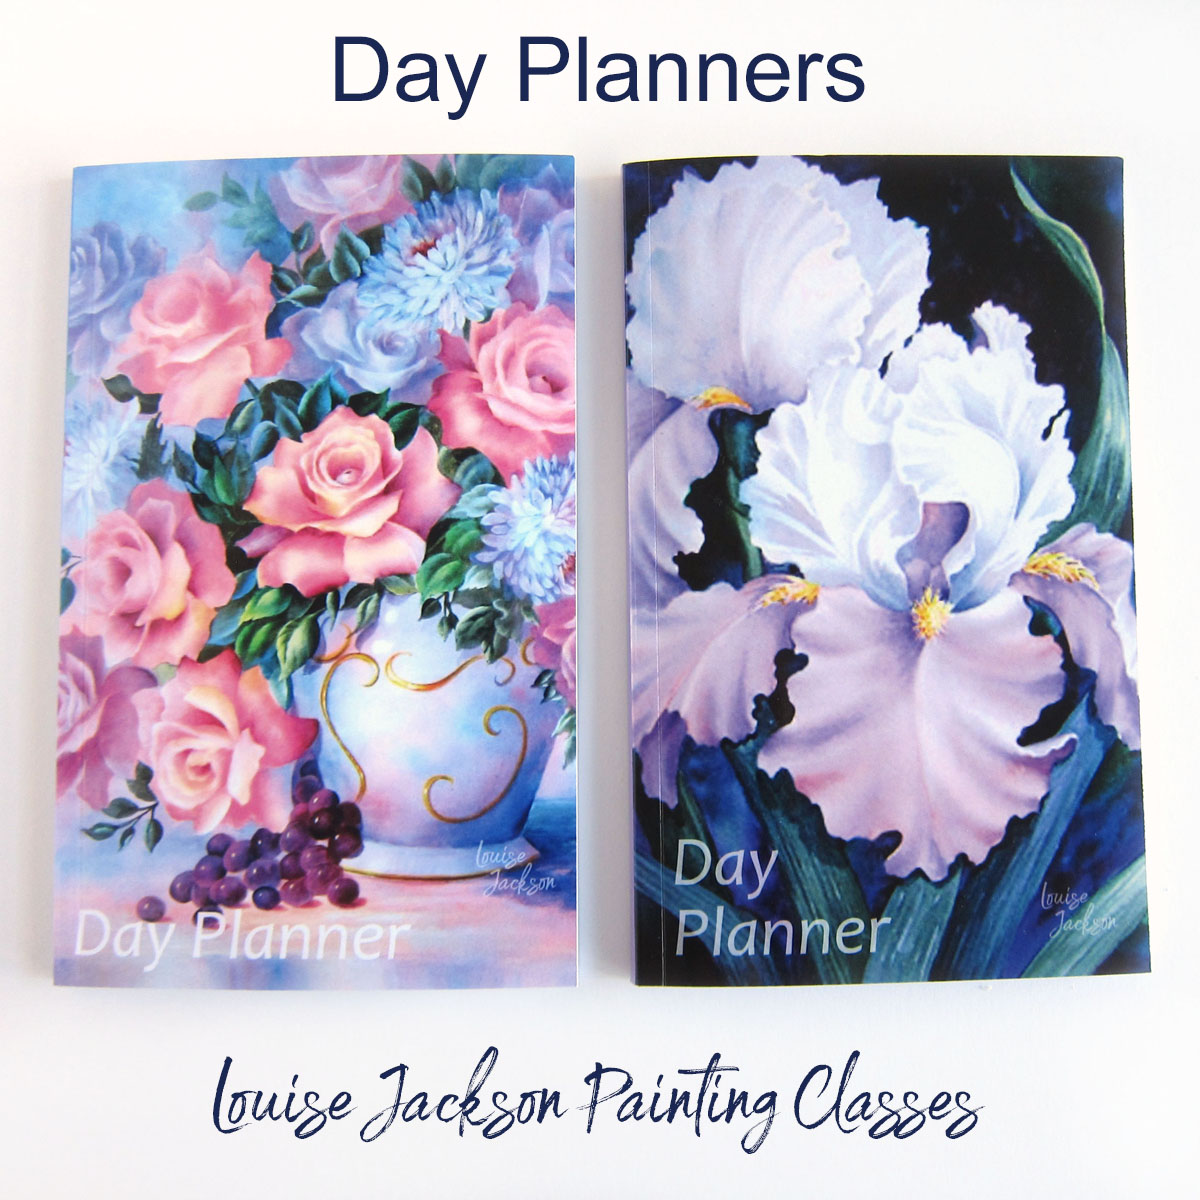 Day planners with beautiful watercolor paintings on the covers featuring roses and irises. 